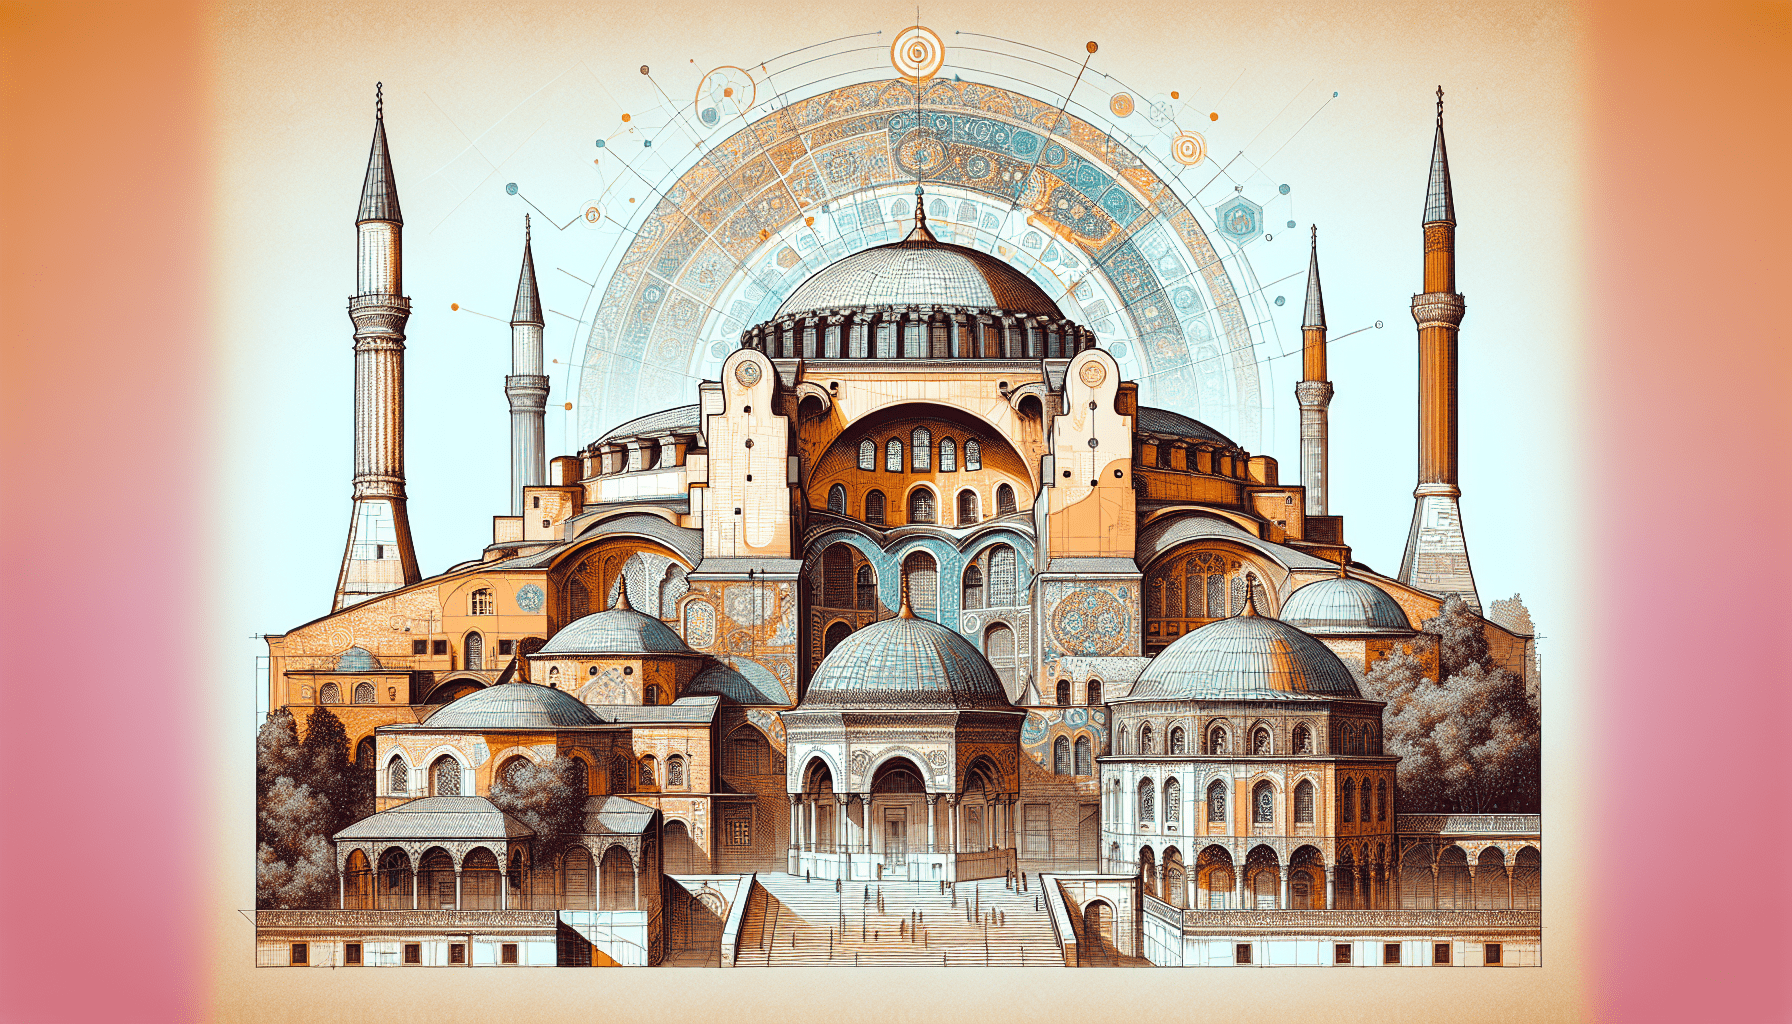 Illustration of a historical Byzantine architectural structure in Turkey, featuring multiple domes, minarets, and detailed archways, set against a gradient background.